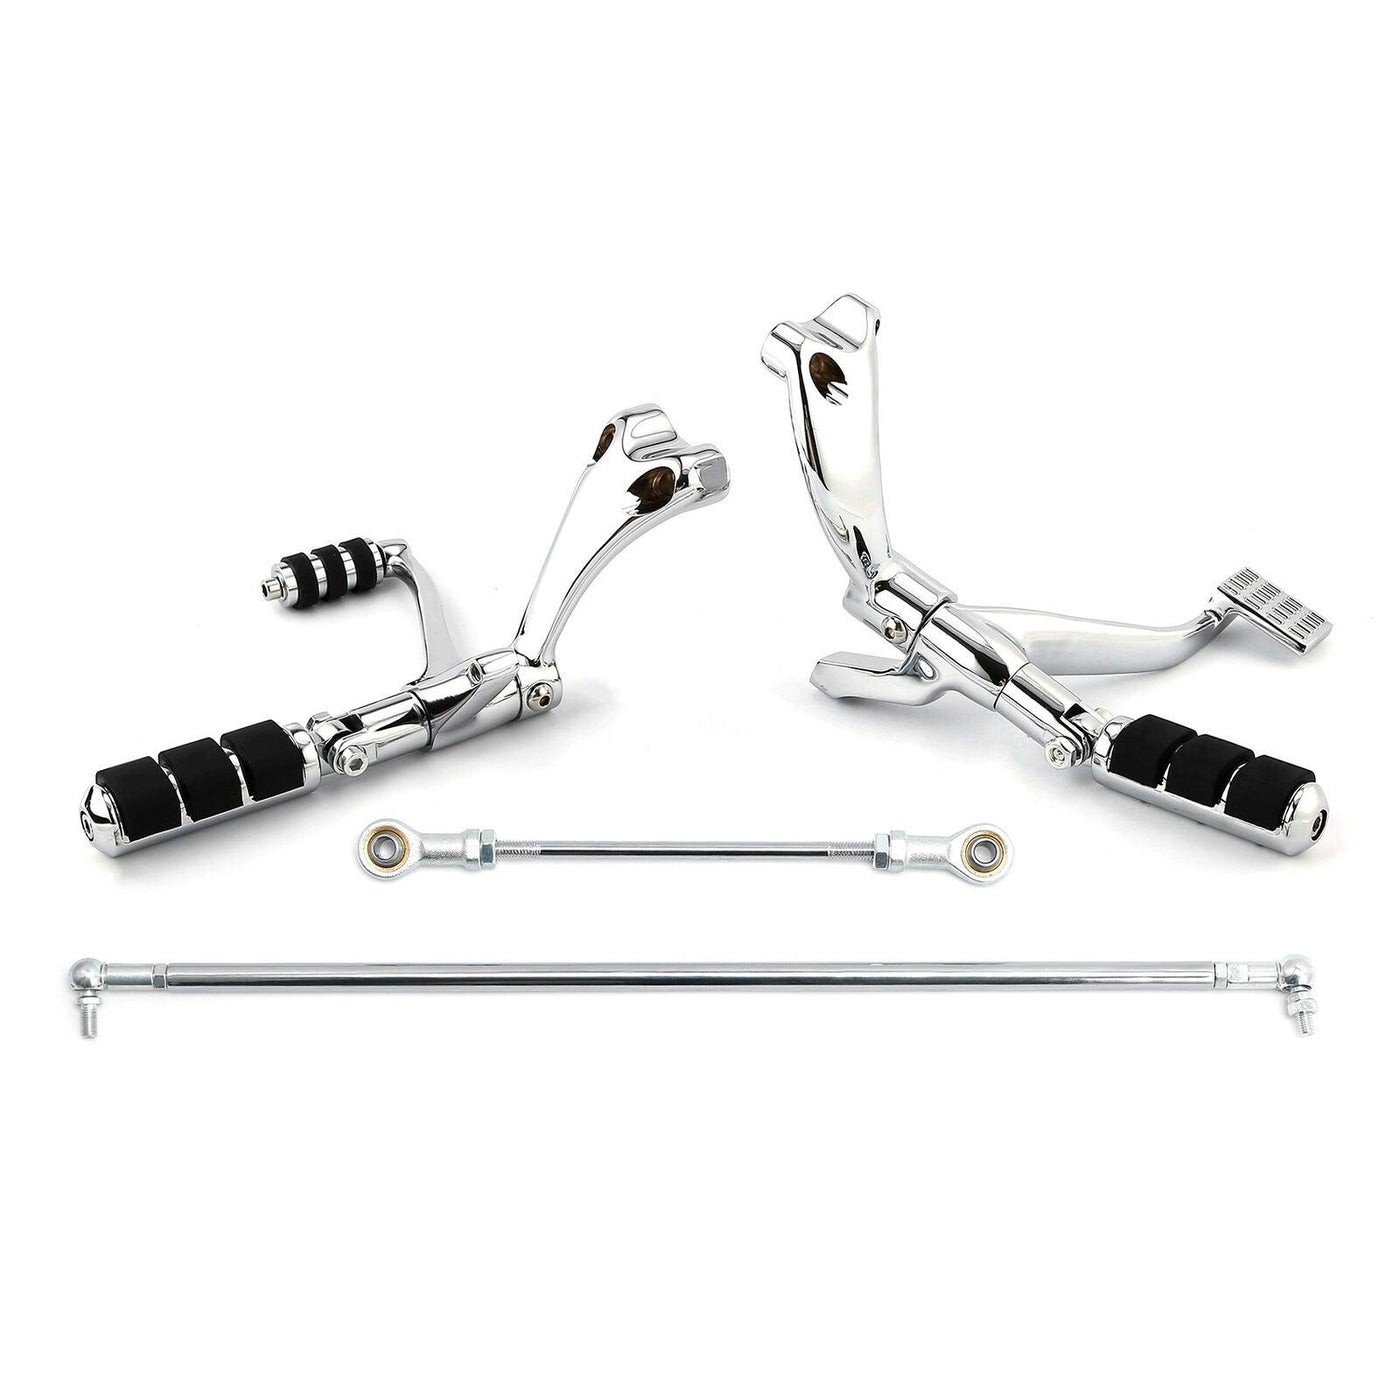 Forward Controls Pegs Levers Linkages Fit For Harley XL 1200 883 Custom 04-13 11 - Moto Life Products